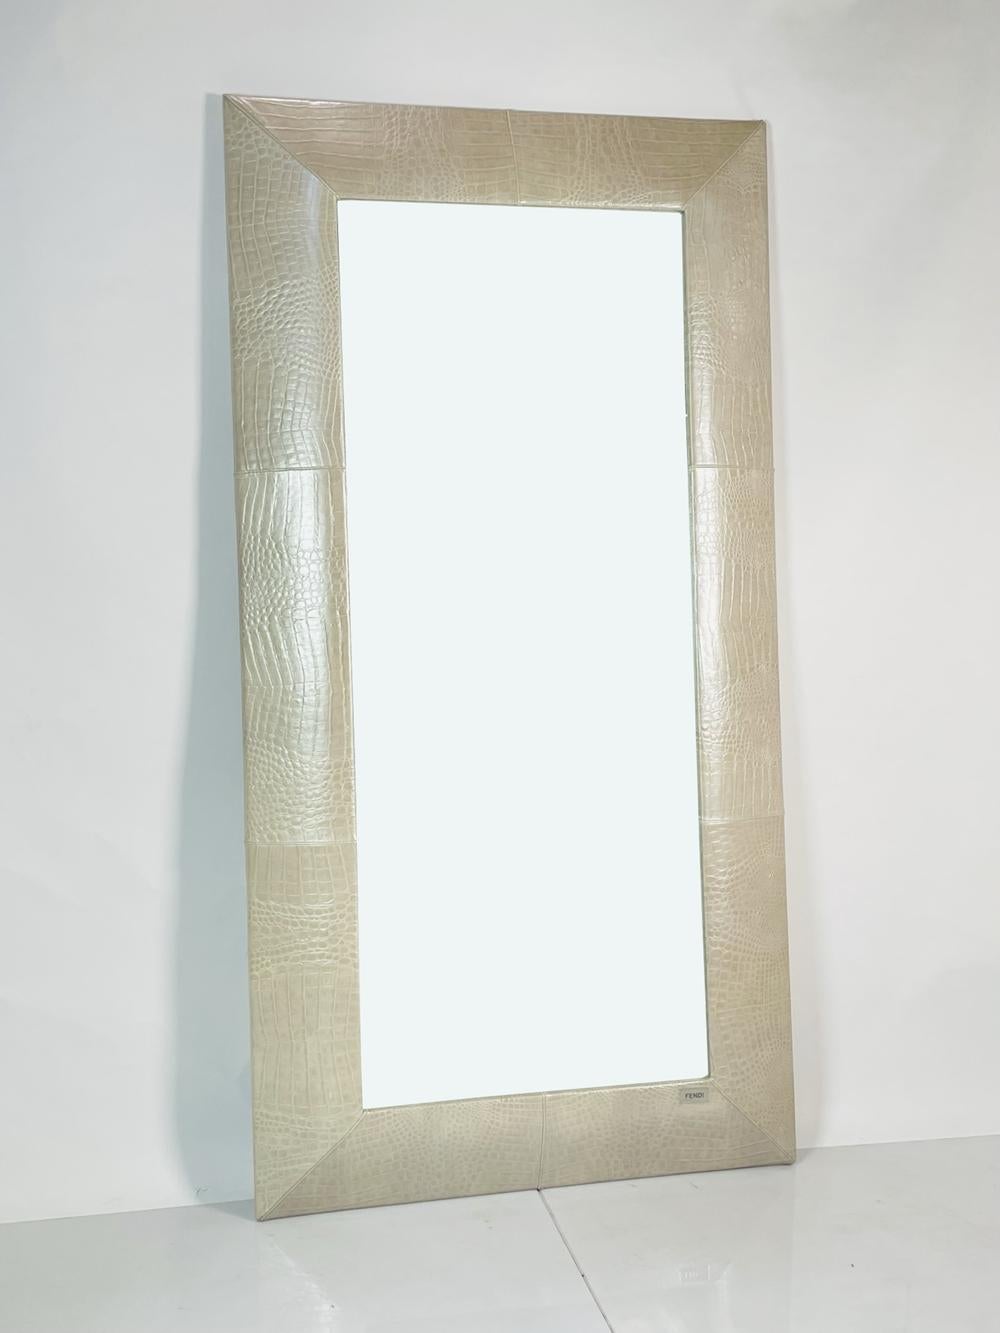 Creae and silver embossed leather Fendi Casa Alupel floor mirror with tonal stitching throughout, mirrored glass surface, rectangular form and brand plaque at base.
Measurements:
85 inches high x 43.50 inches wide x 4 inches deep.
 